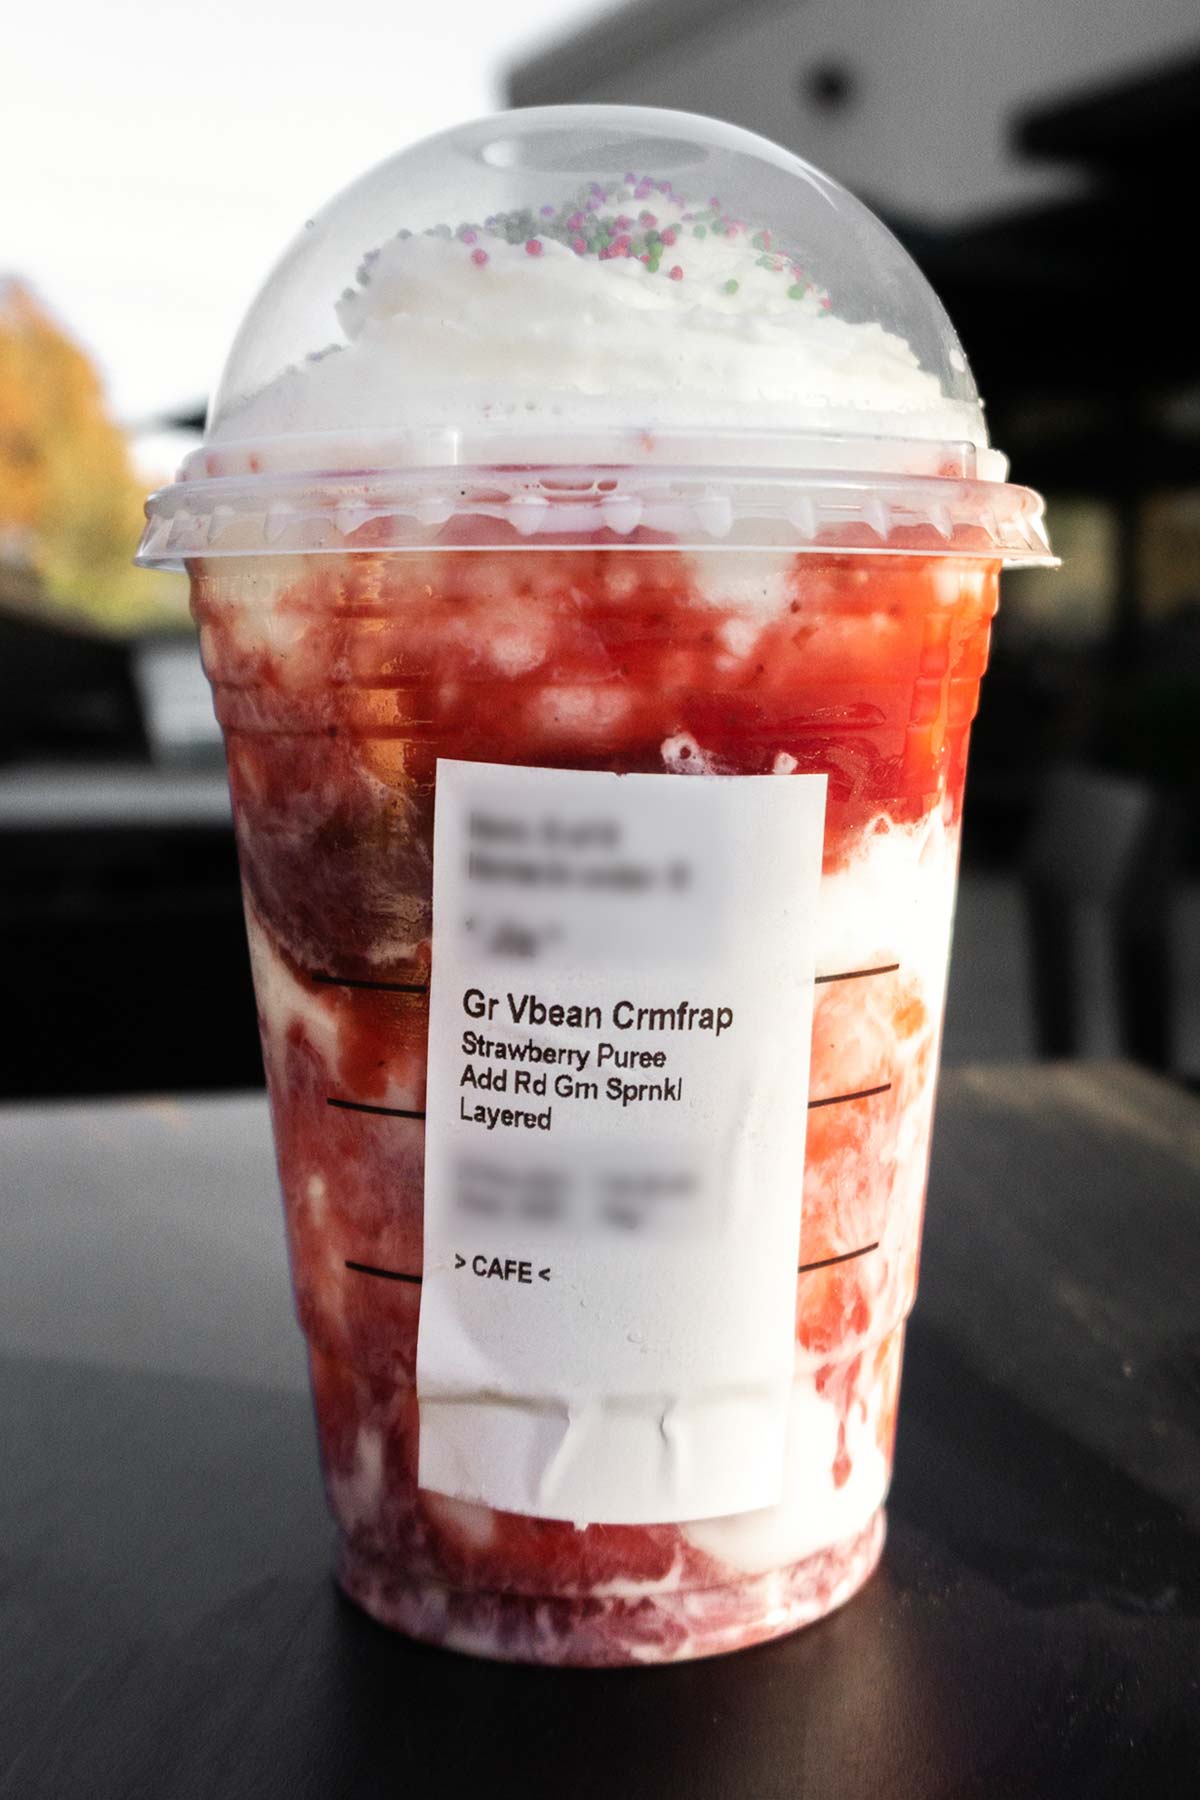 Vanilla frappuccino with strawberry puree layered in and ordering label on the cup.